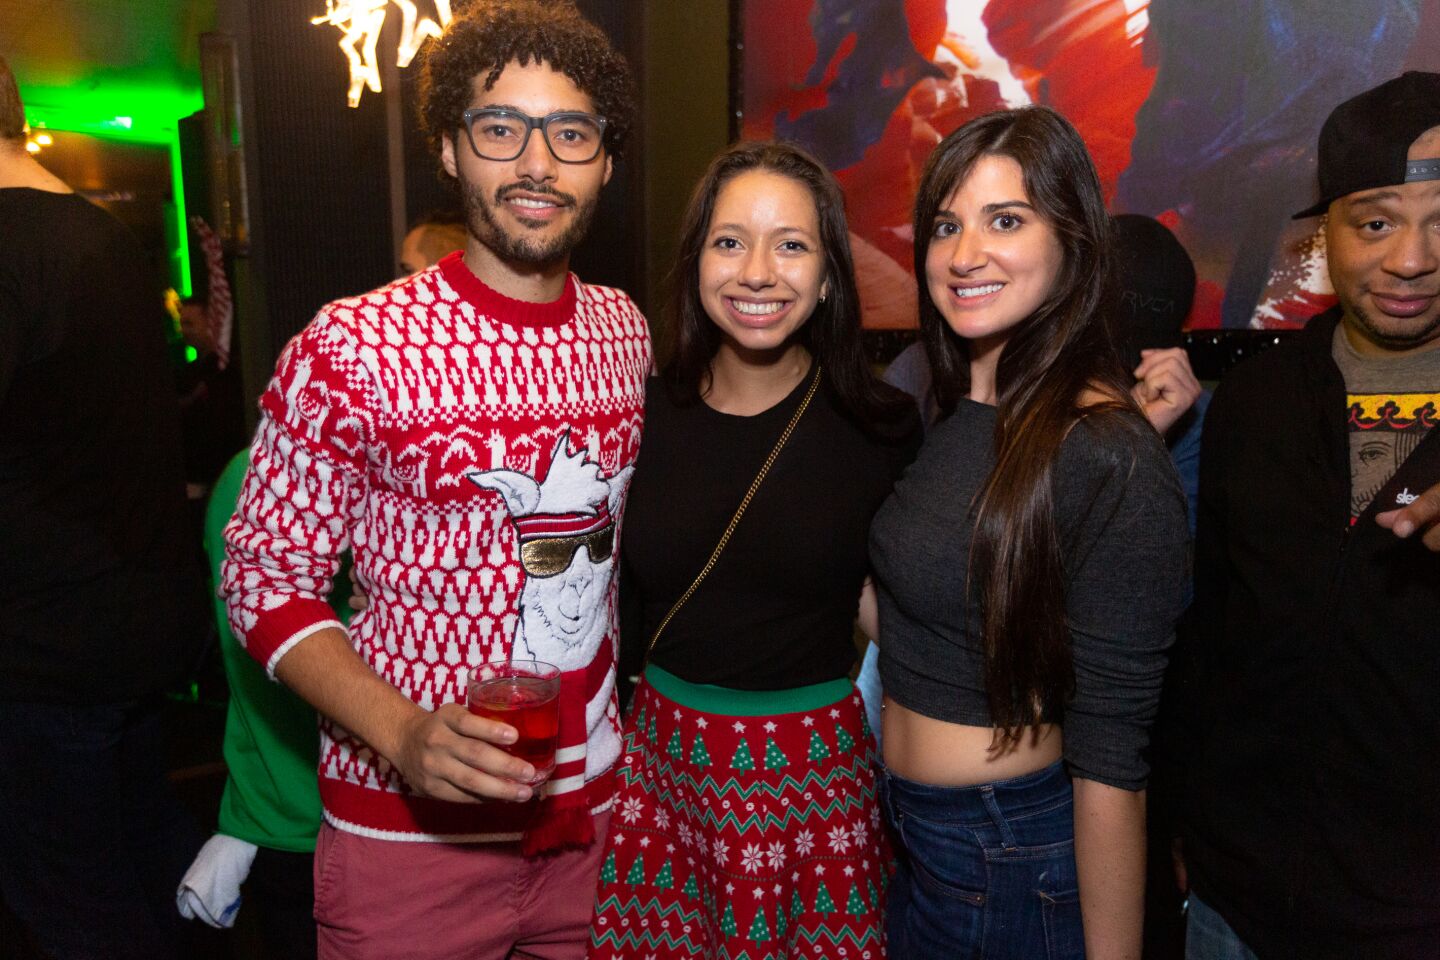 Oxford Social Club's Naughty or Nice Holiday Party